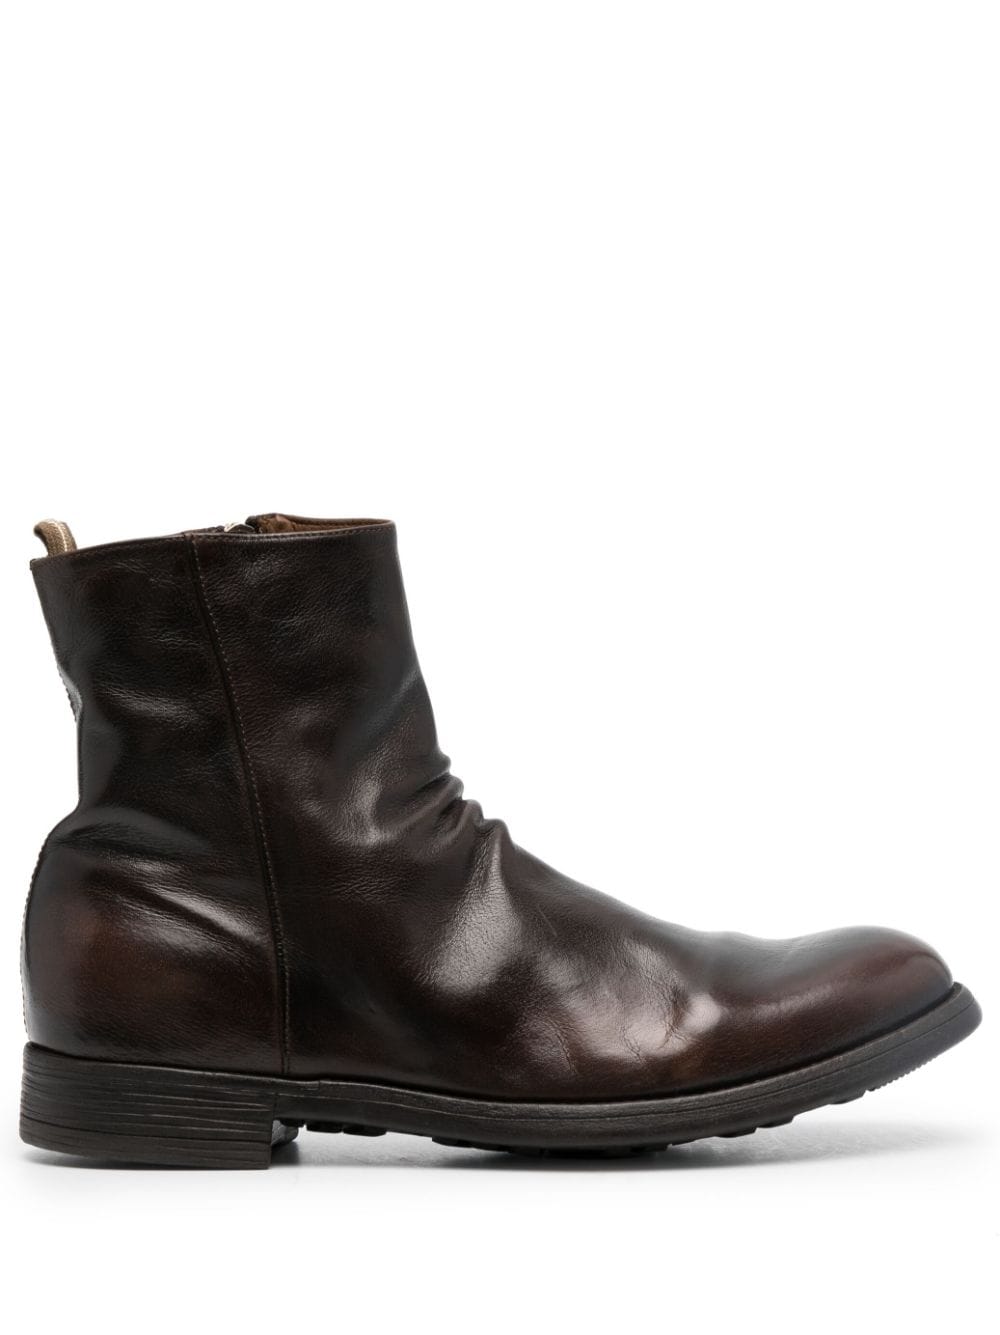 OFFICINE CREATIVE BACK ZIP BOOTS 【超ポイントバック祭】 - 靴